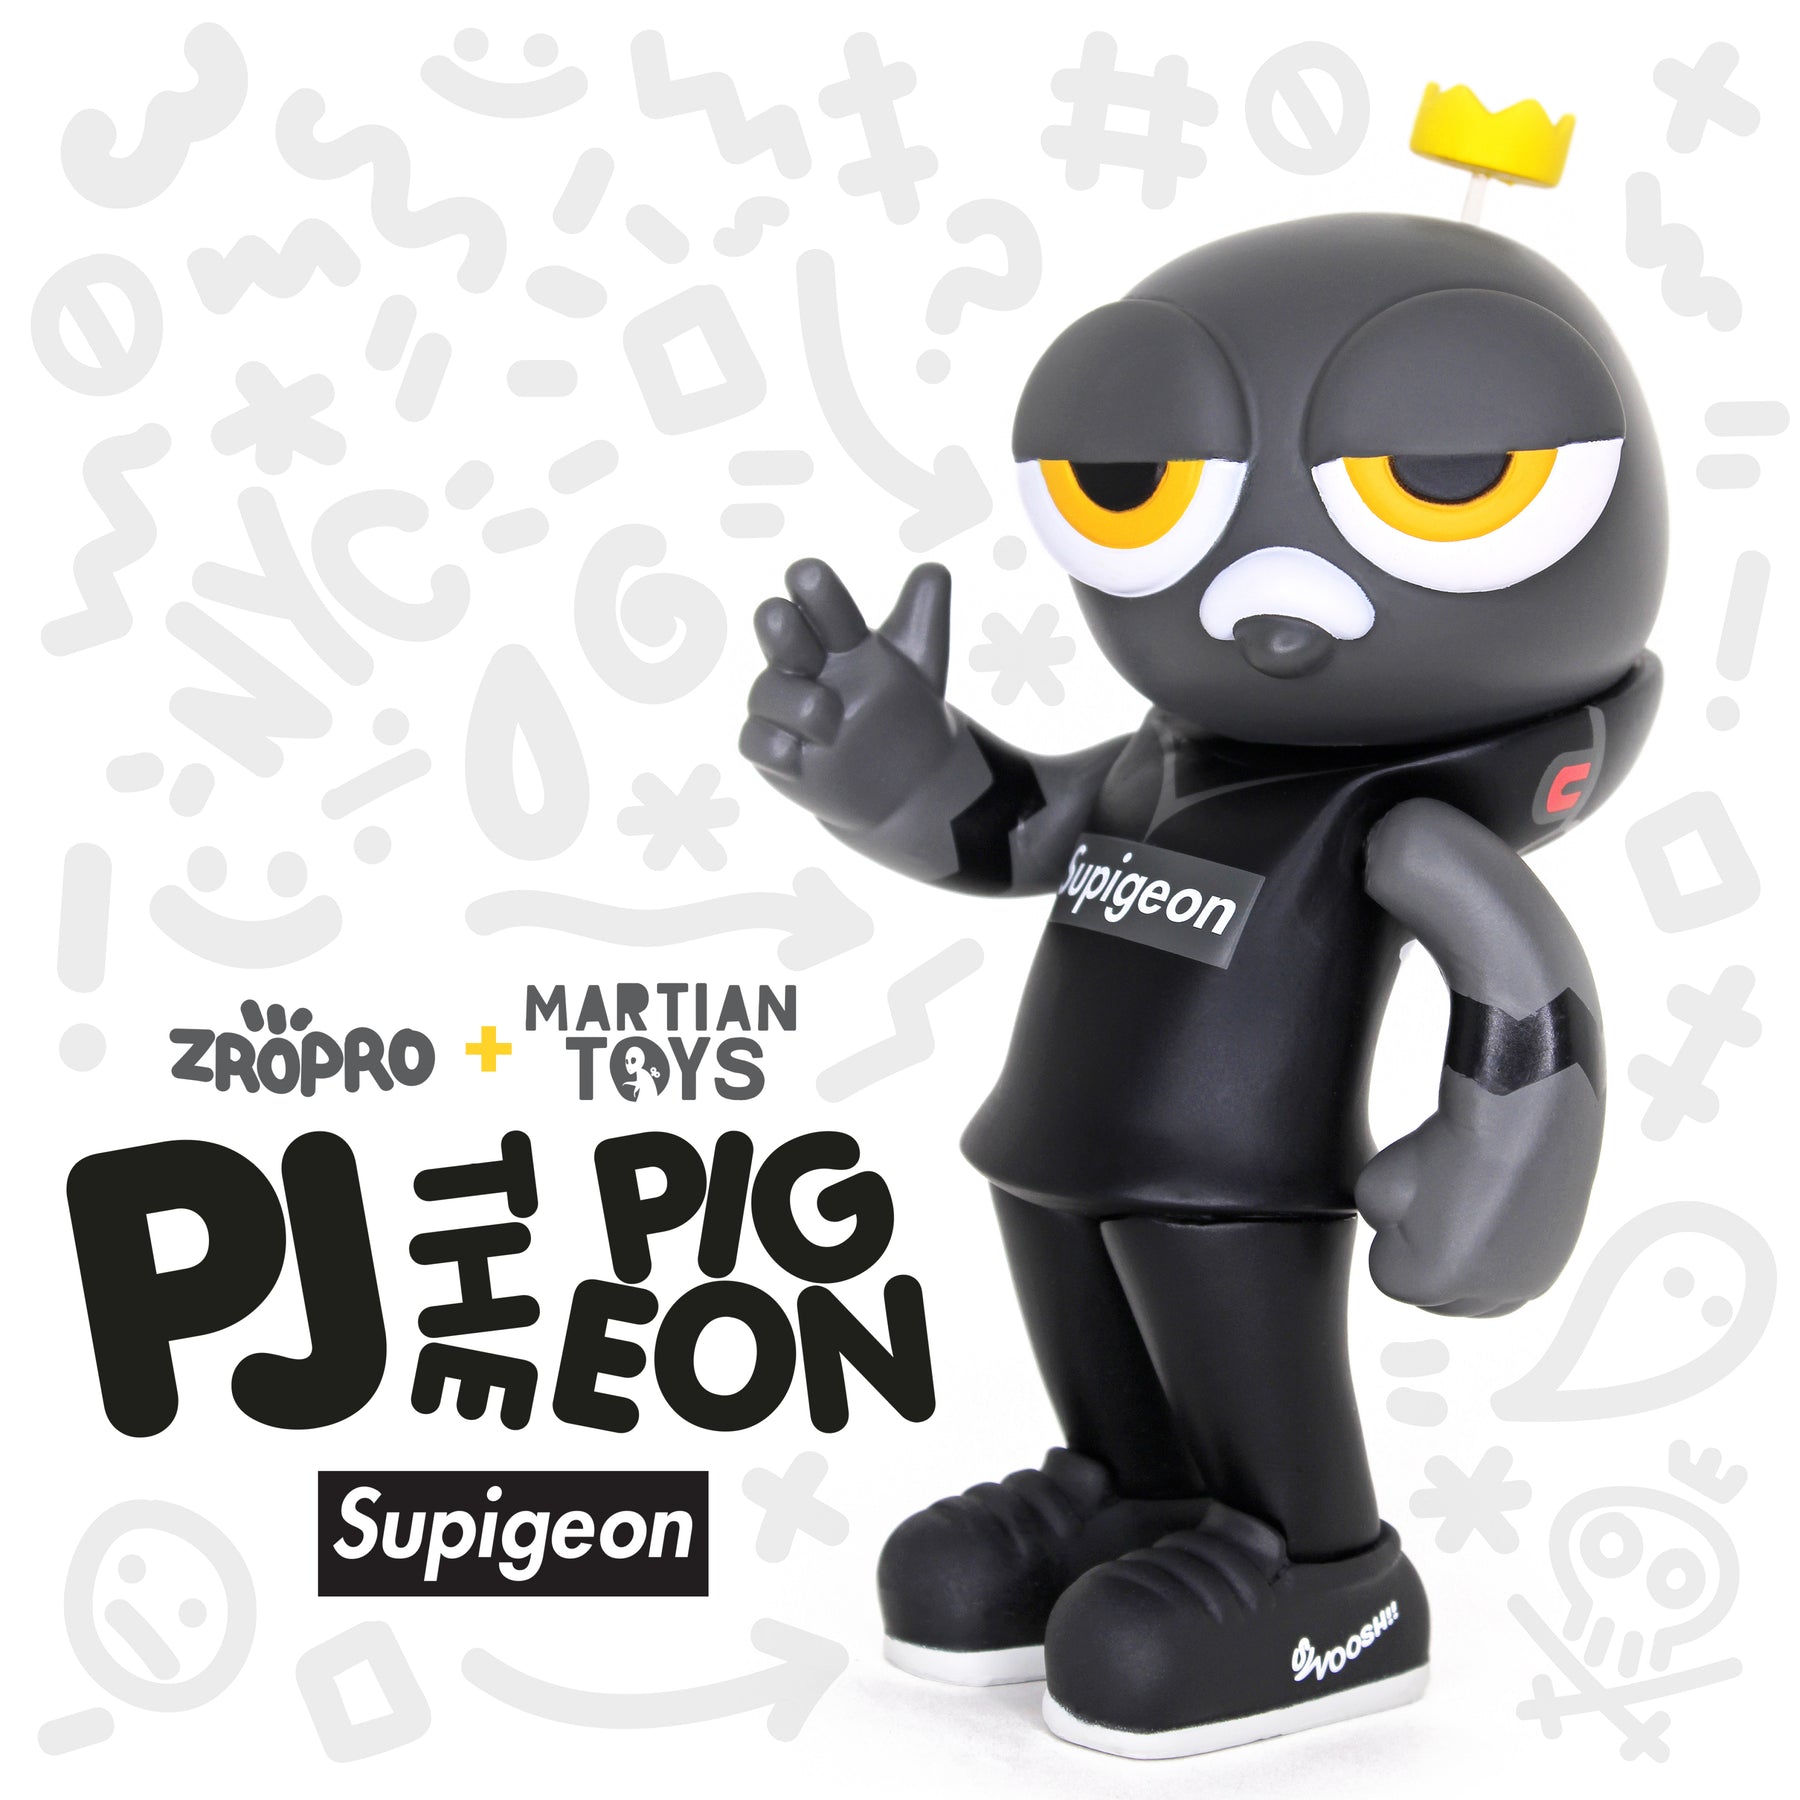 Pj The Pigeon Teq Supigeon Edition By Zero Productivity X Quiccs X Ma Martian Toys